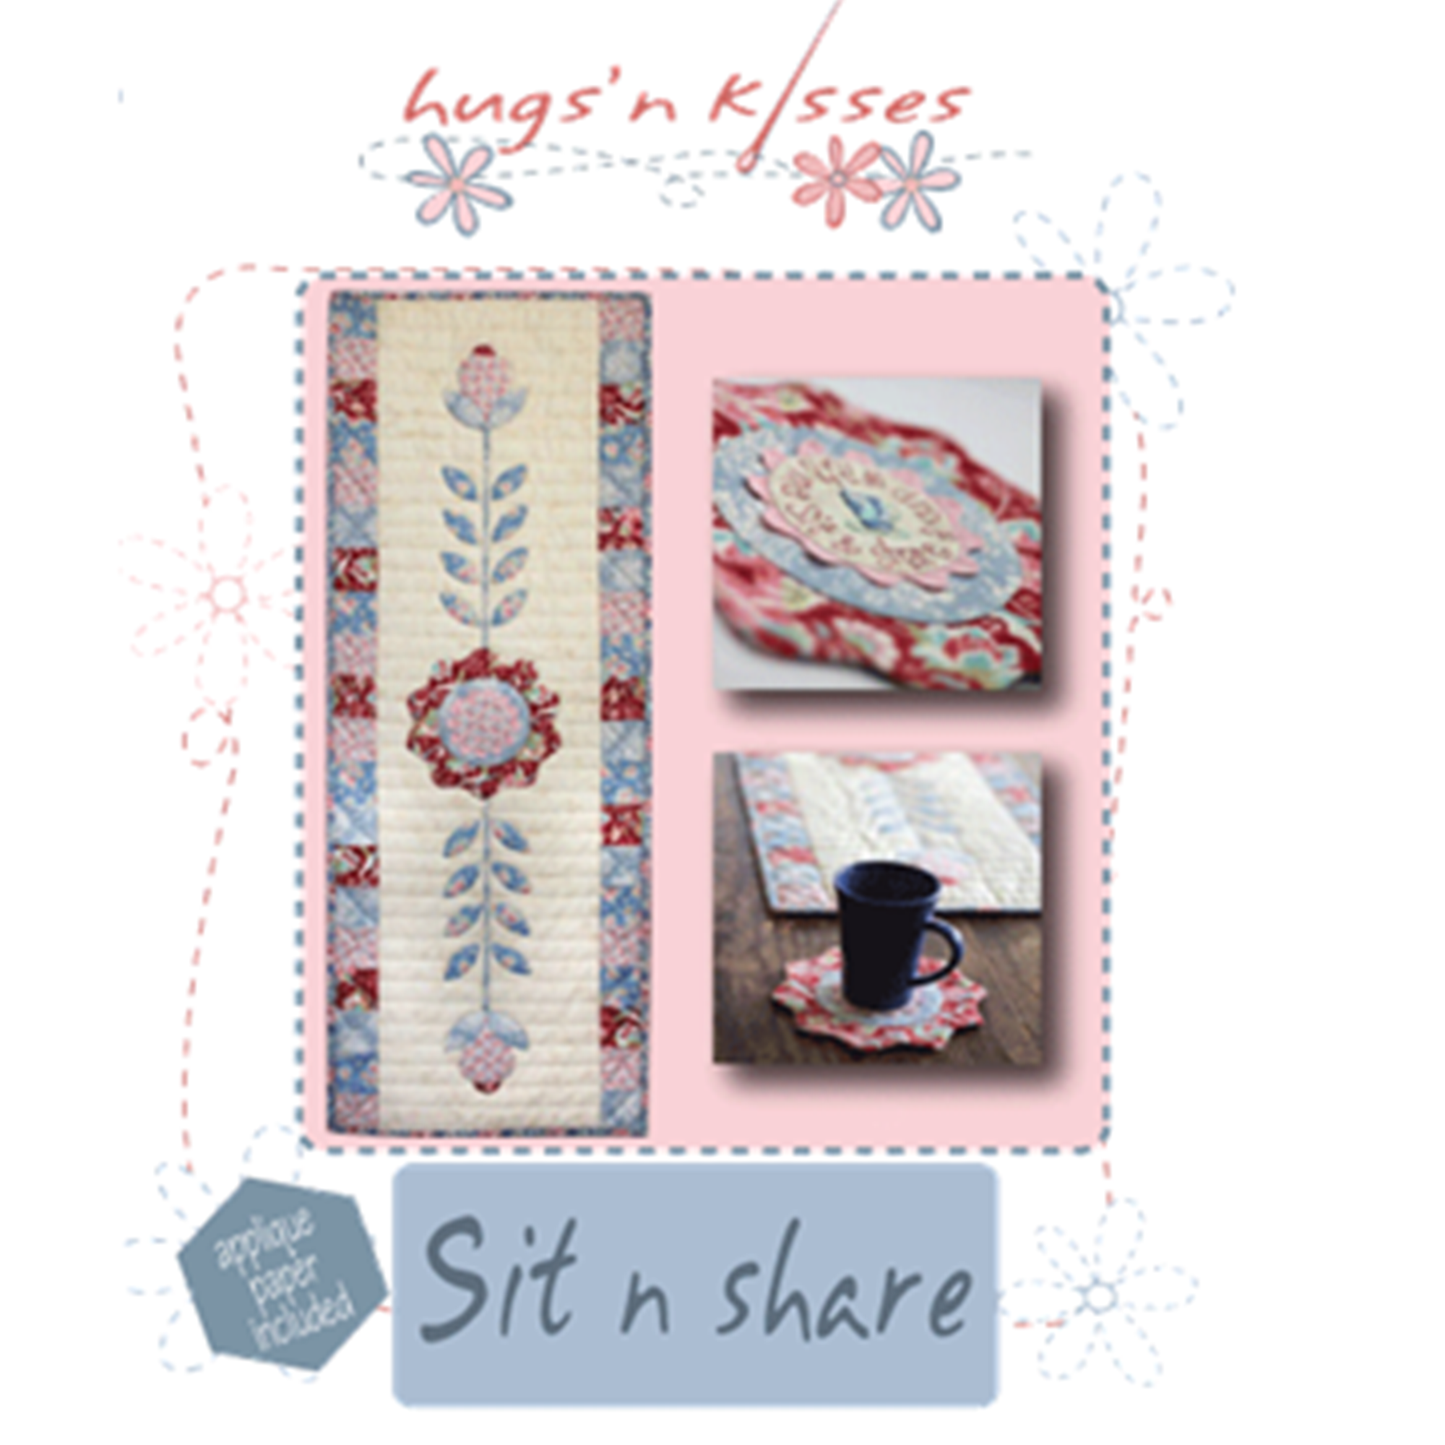 Sit n Share Table Runner applique and embroidery Hugs 'N Kisses paper pattern